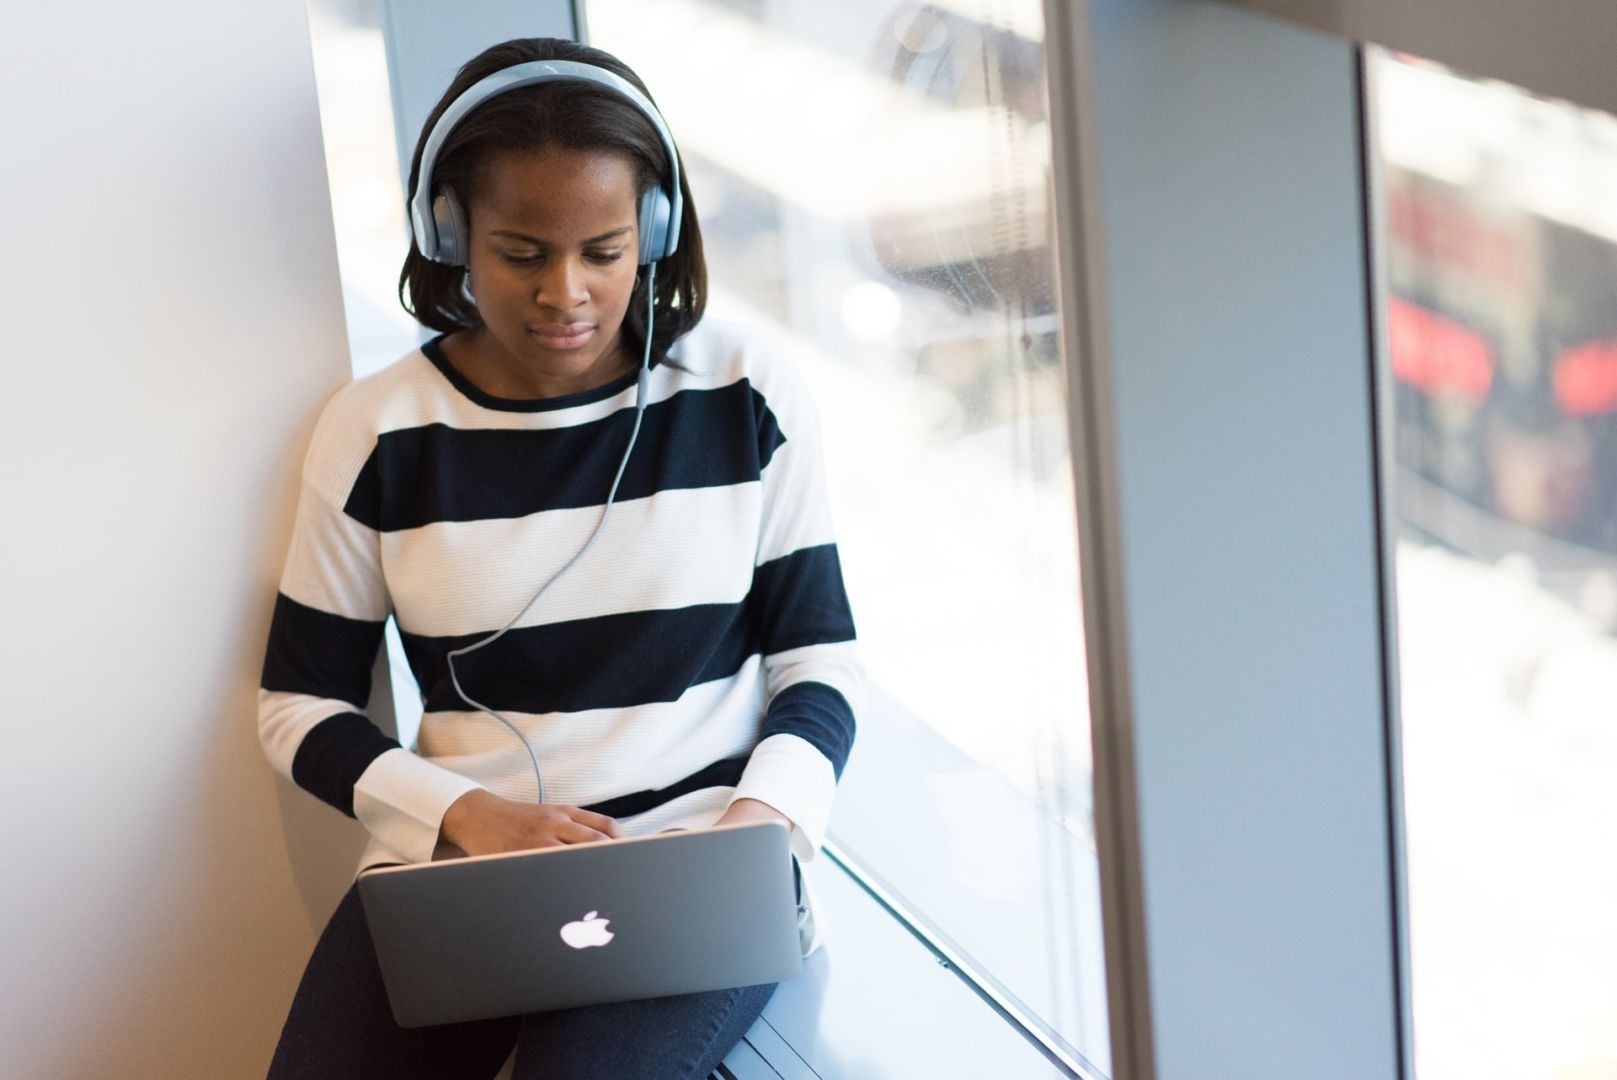 Black woman, sits on window ledge typing on a laptop and she is waring a black and white long sleeve sweater and appears to be listening to music via headphones.